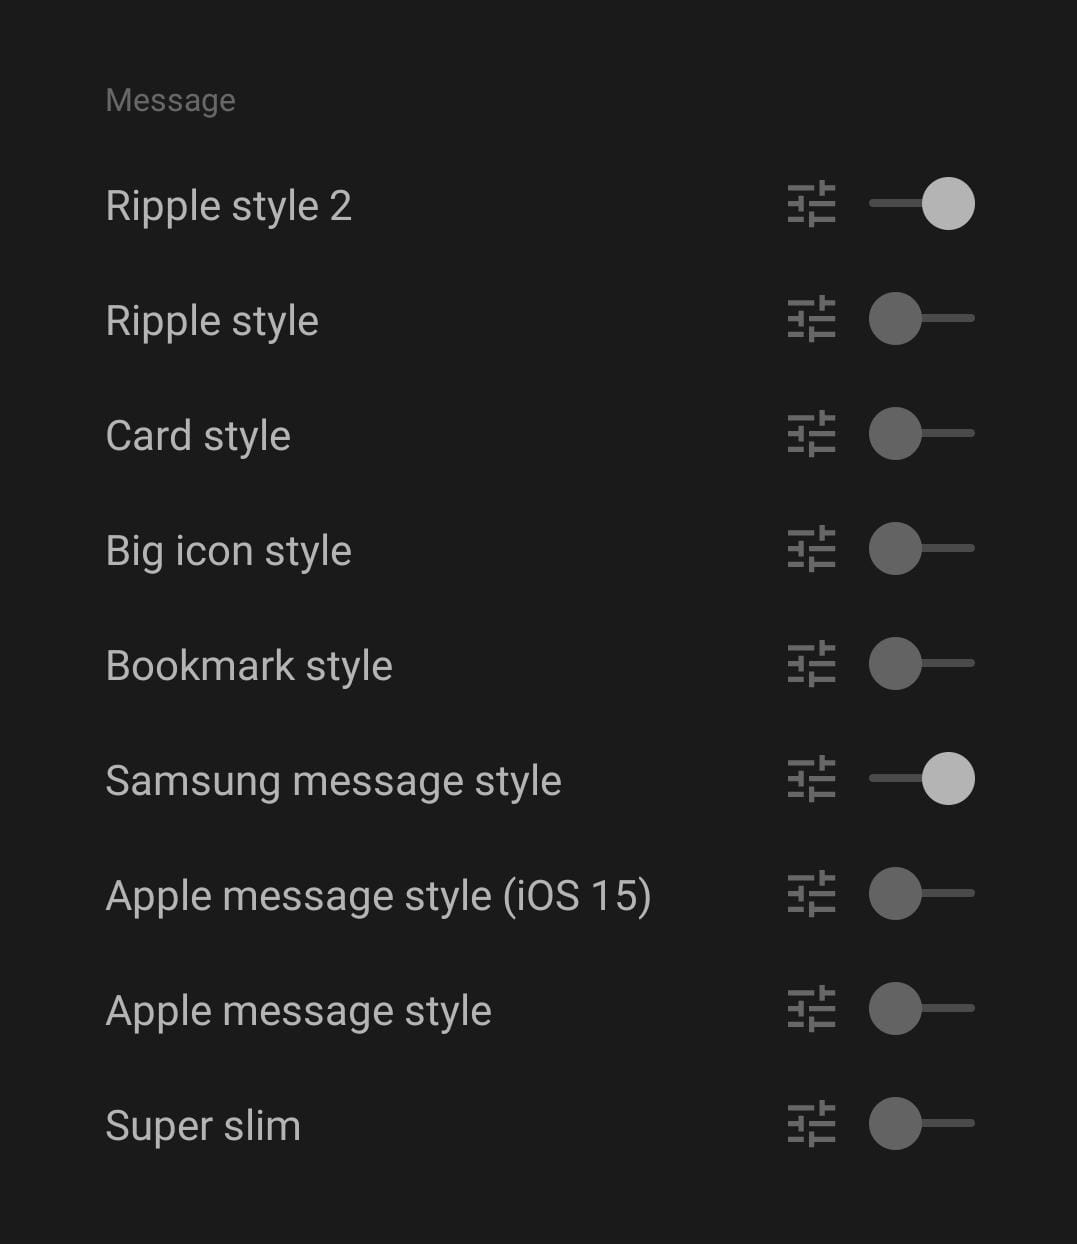 Enable Samsung Message Style